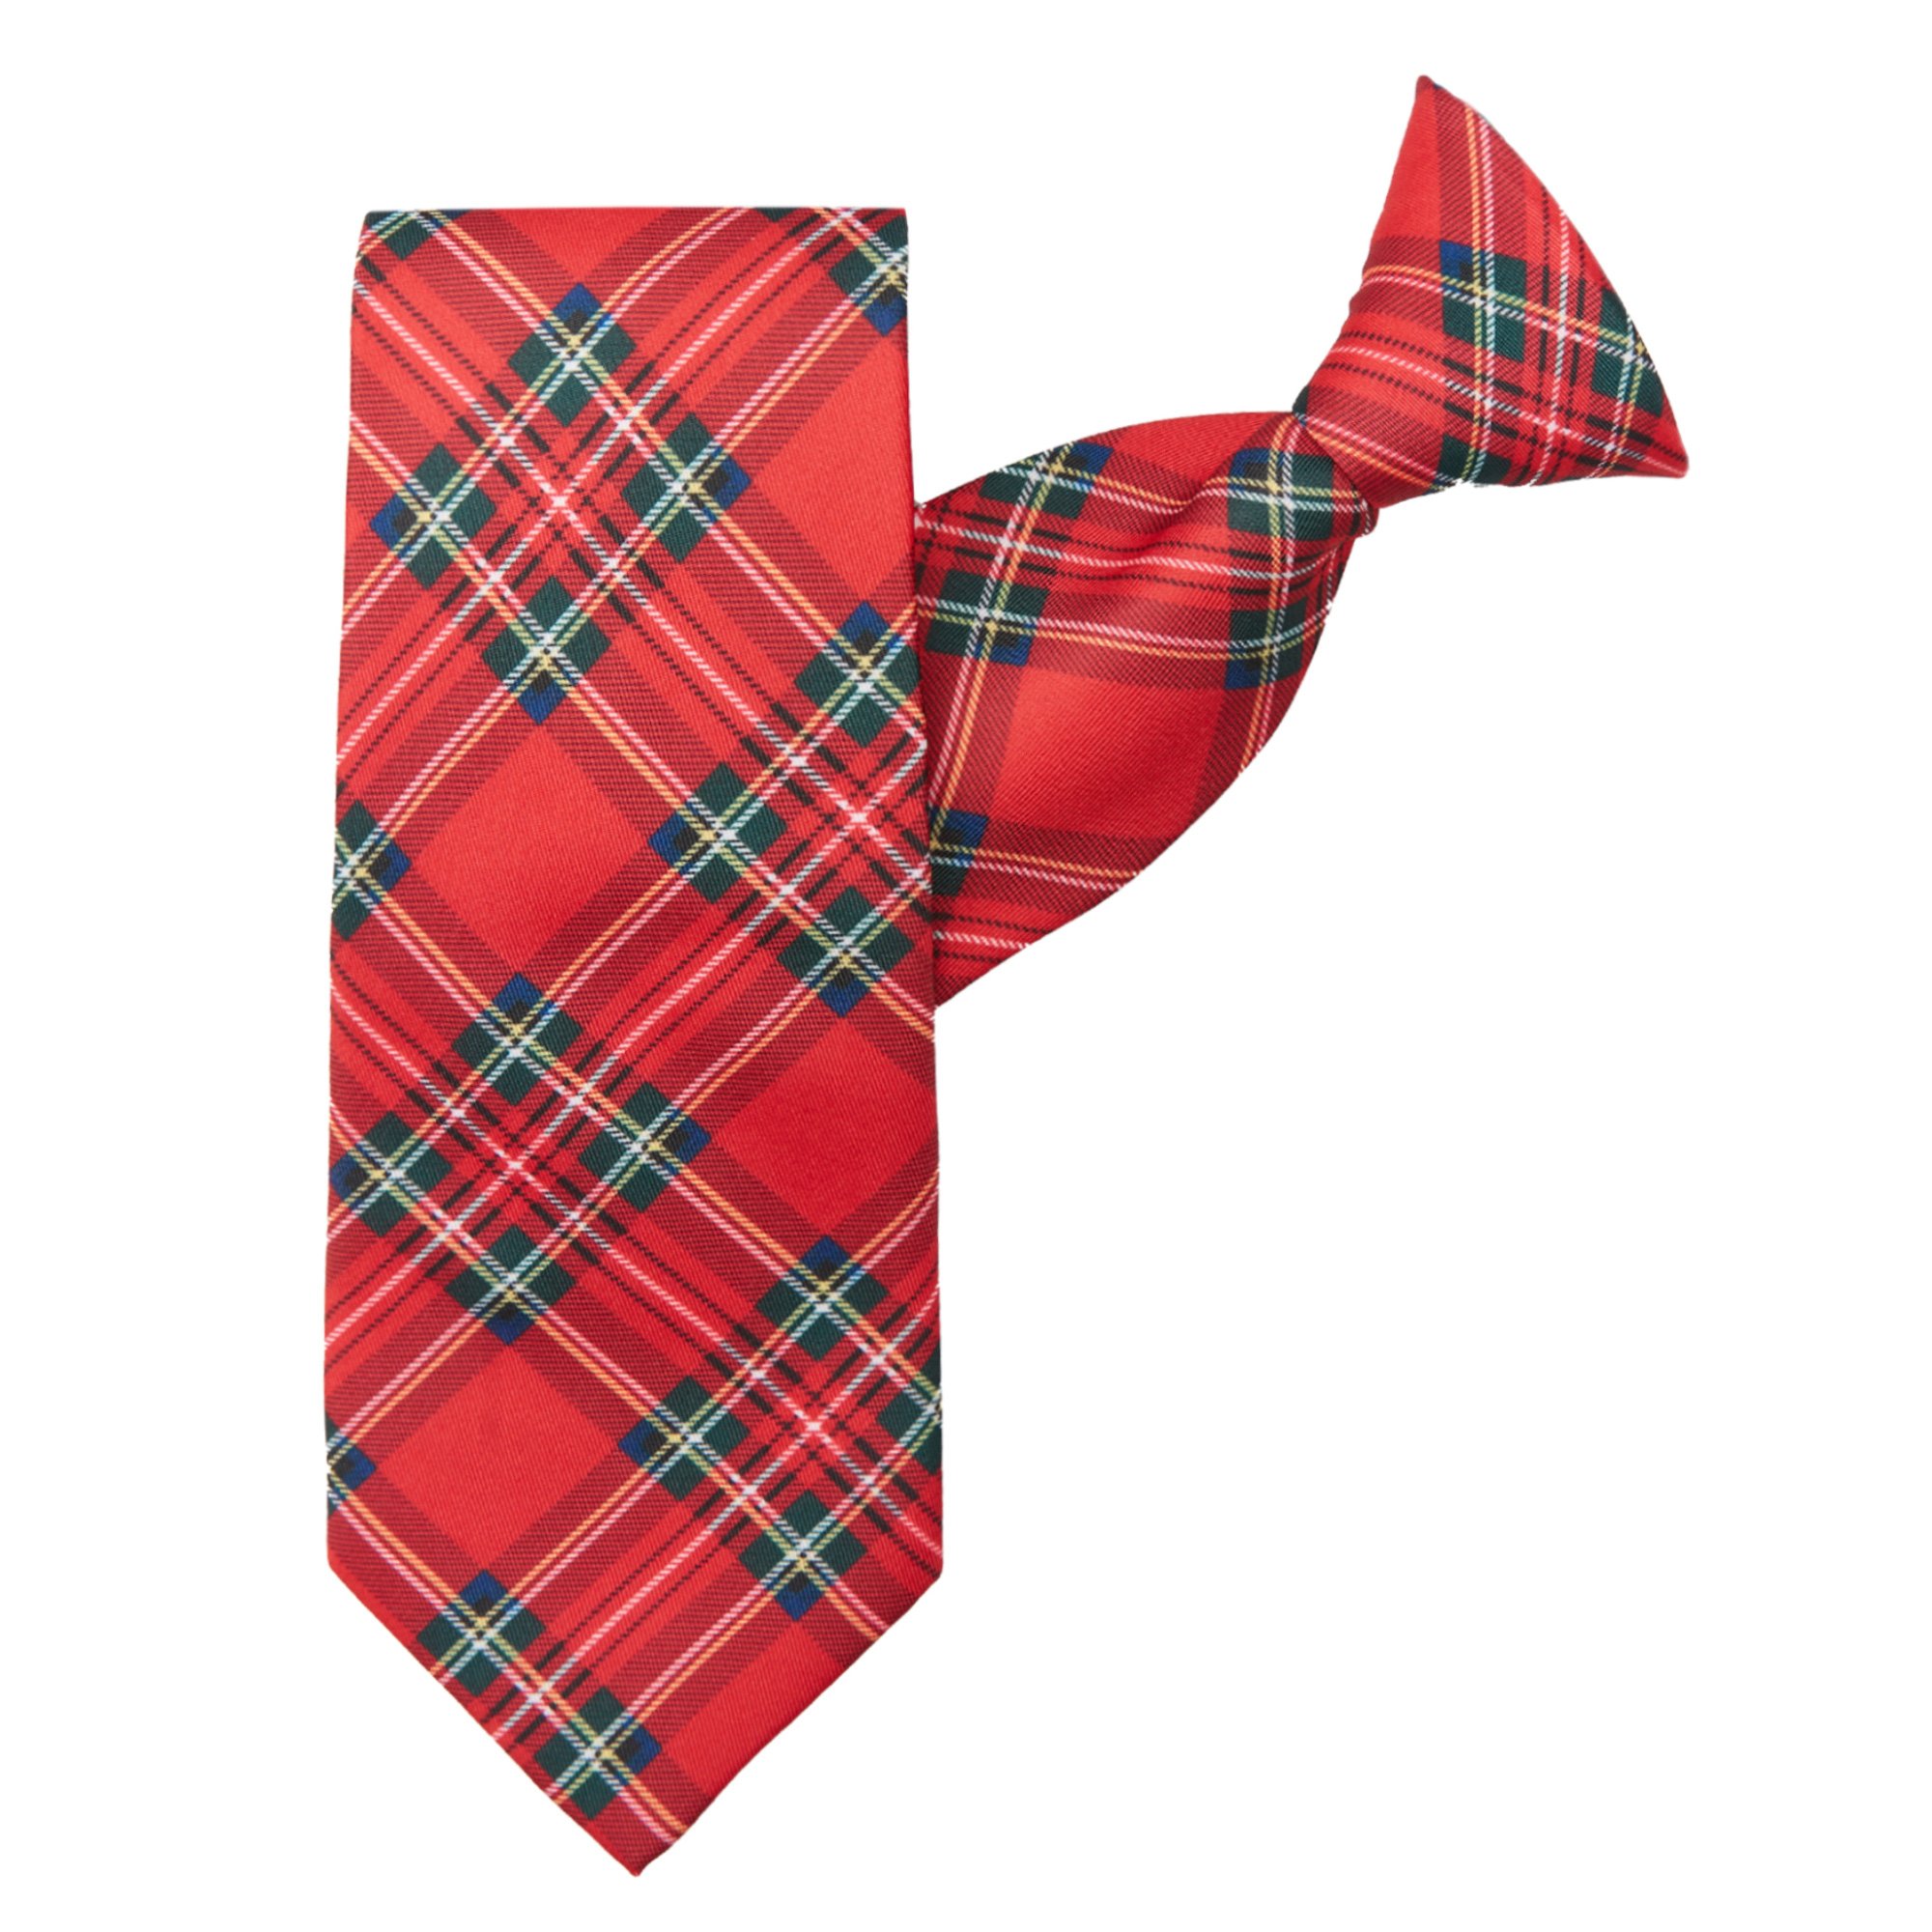 Jacob Alexander Merry Christmas Royal Stewart Red Plaid Men's Vest Clip-On Neck Tie and Adult Face Mask Set - 2XL - image 3 of 8